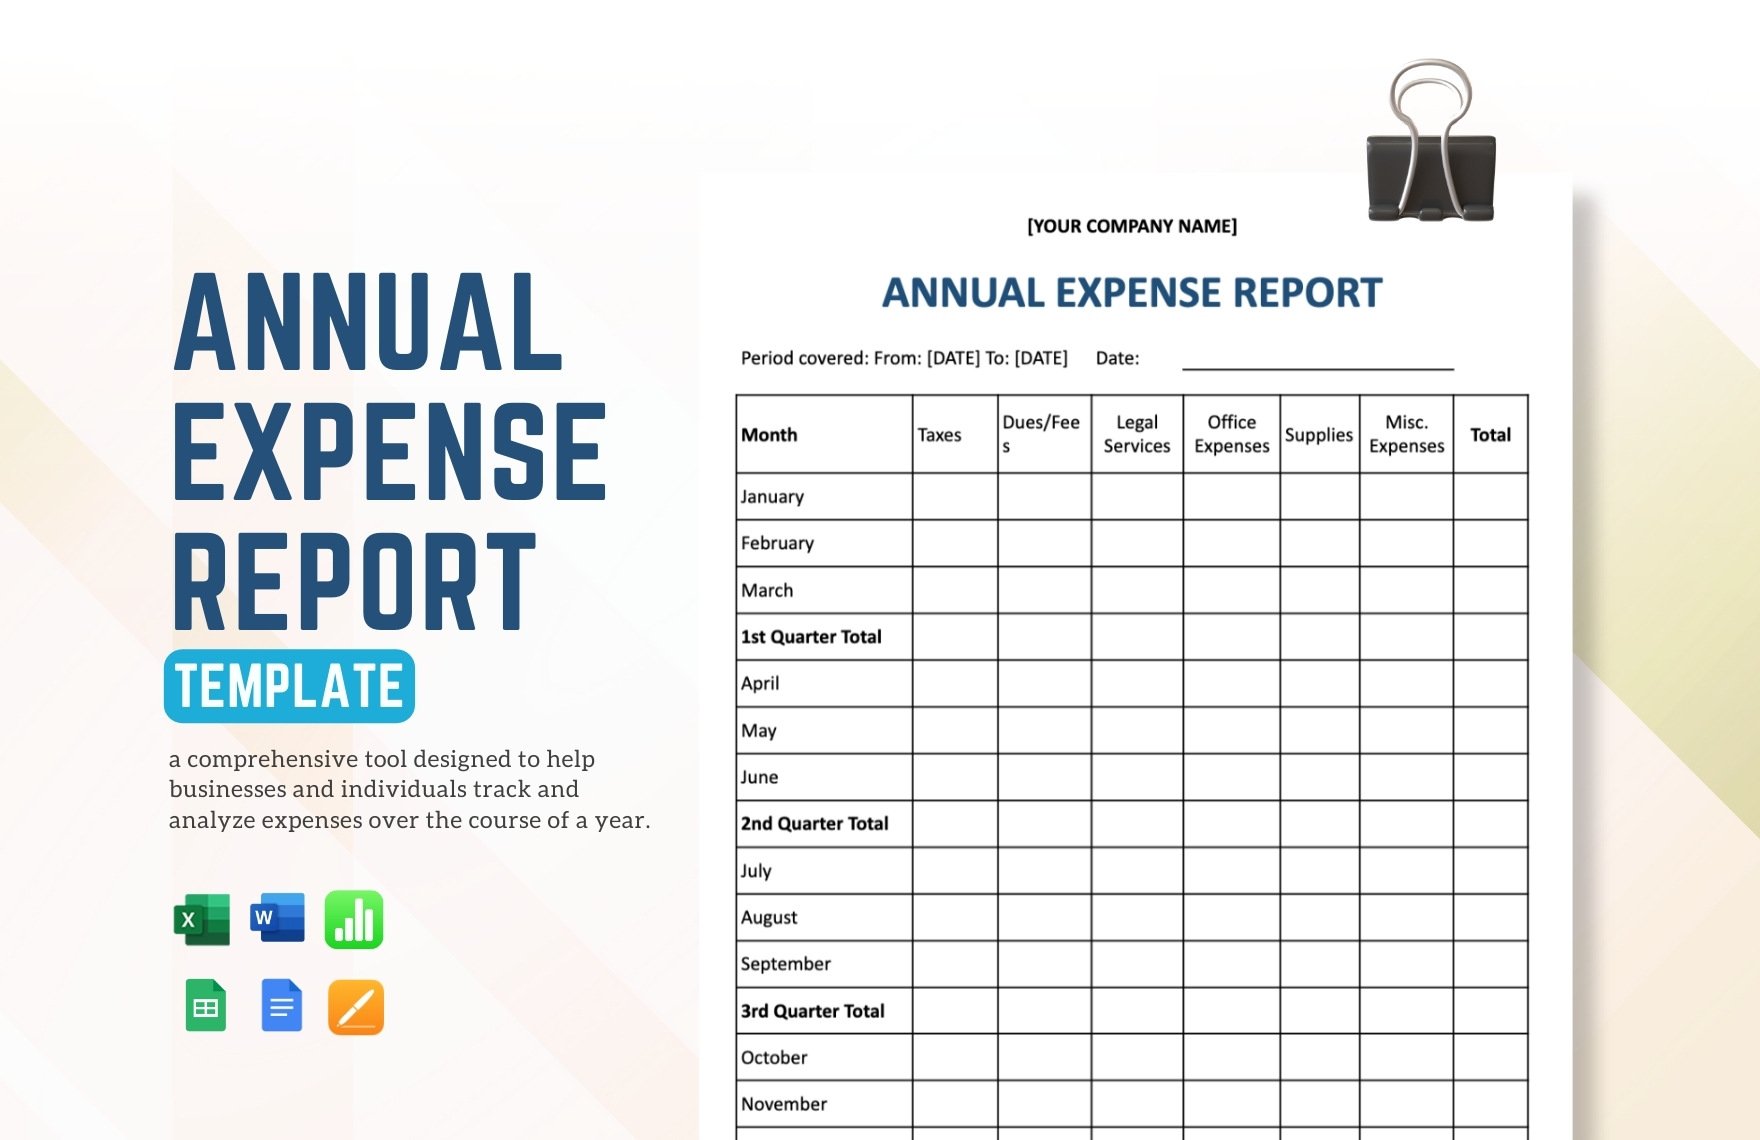 Annual Expense Report Template in Word, Google Docs, Excel, Google Sheets, Apple Pages, Apple Numbers